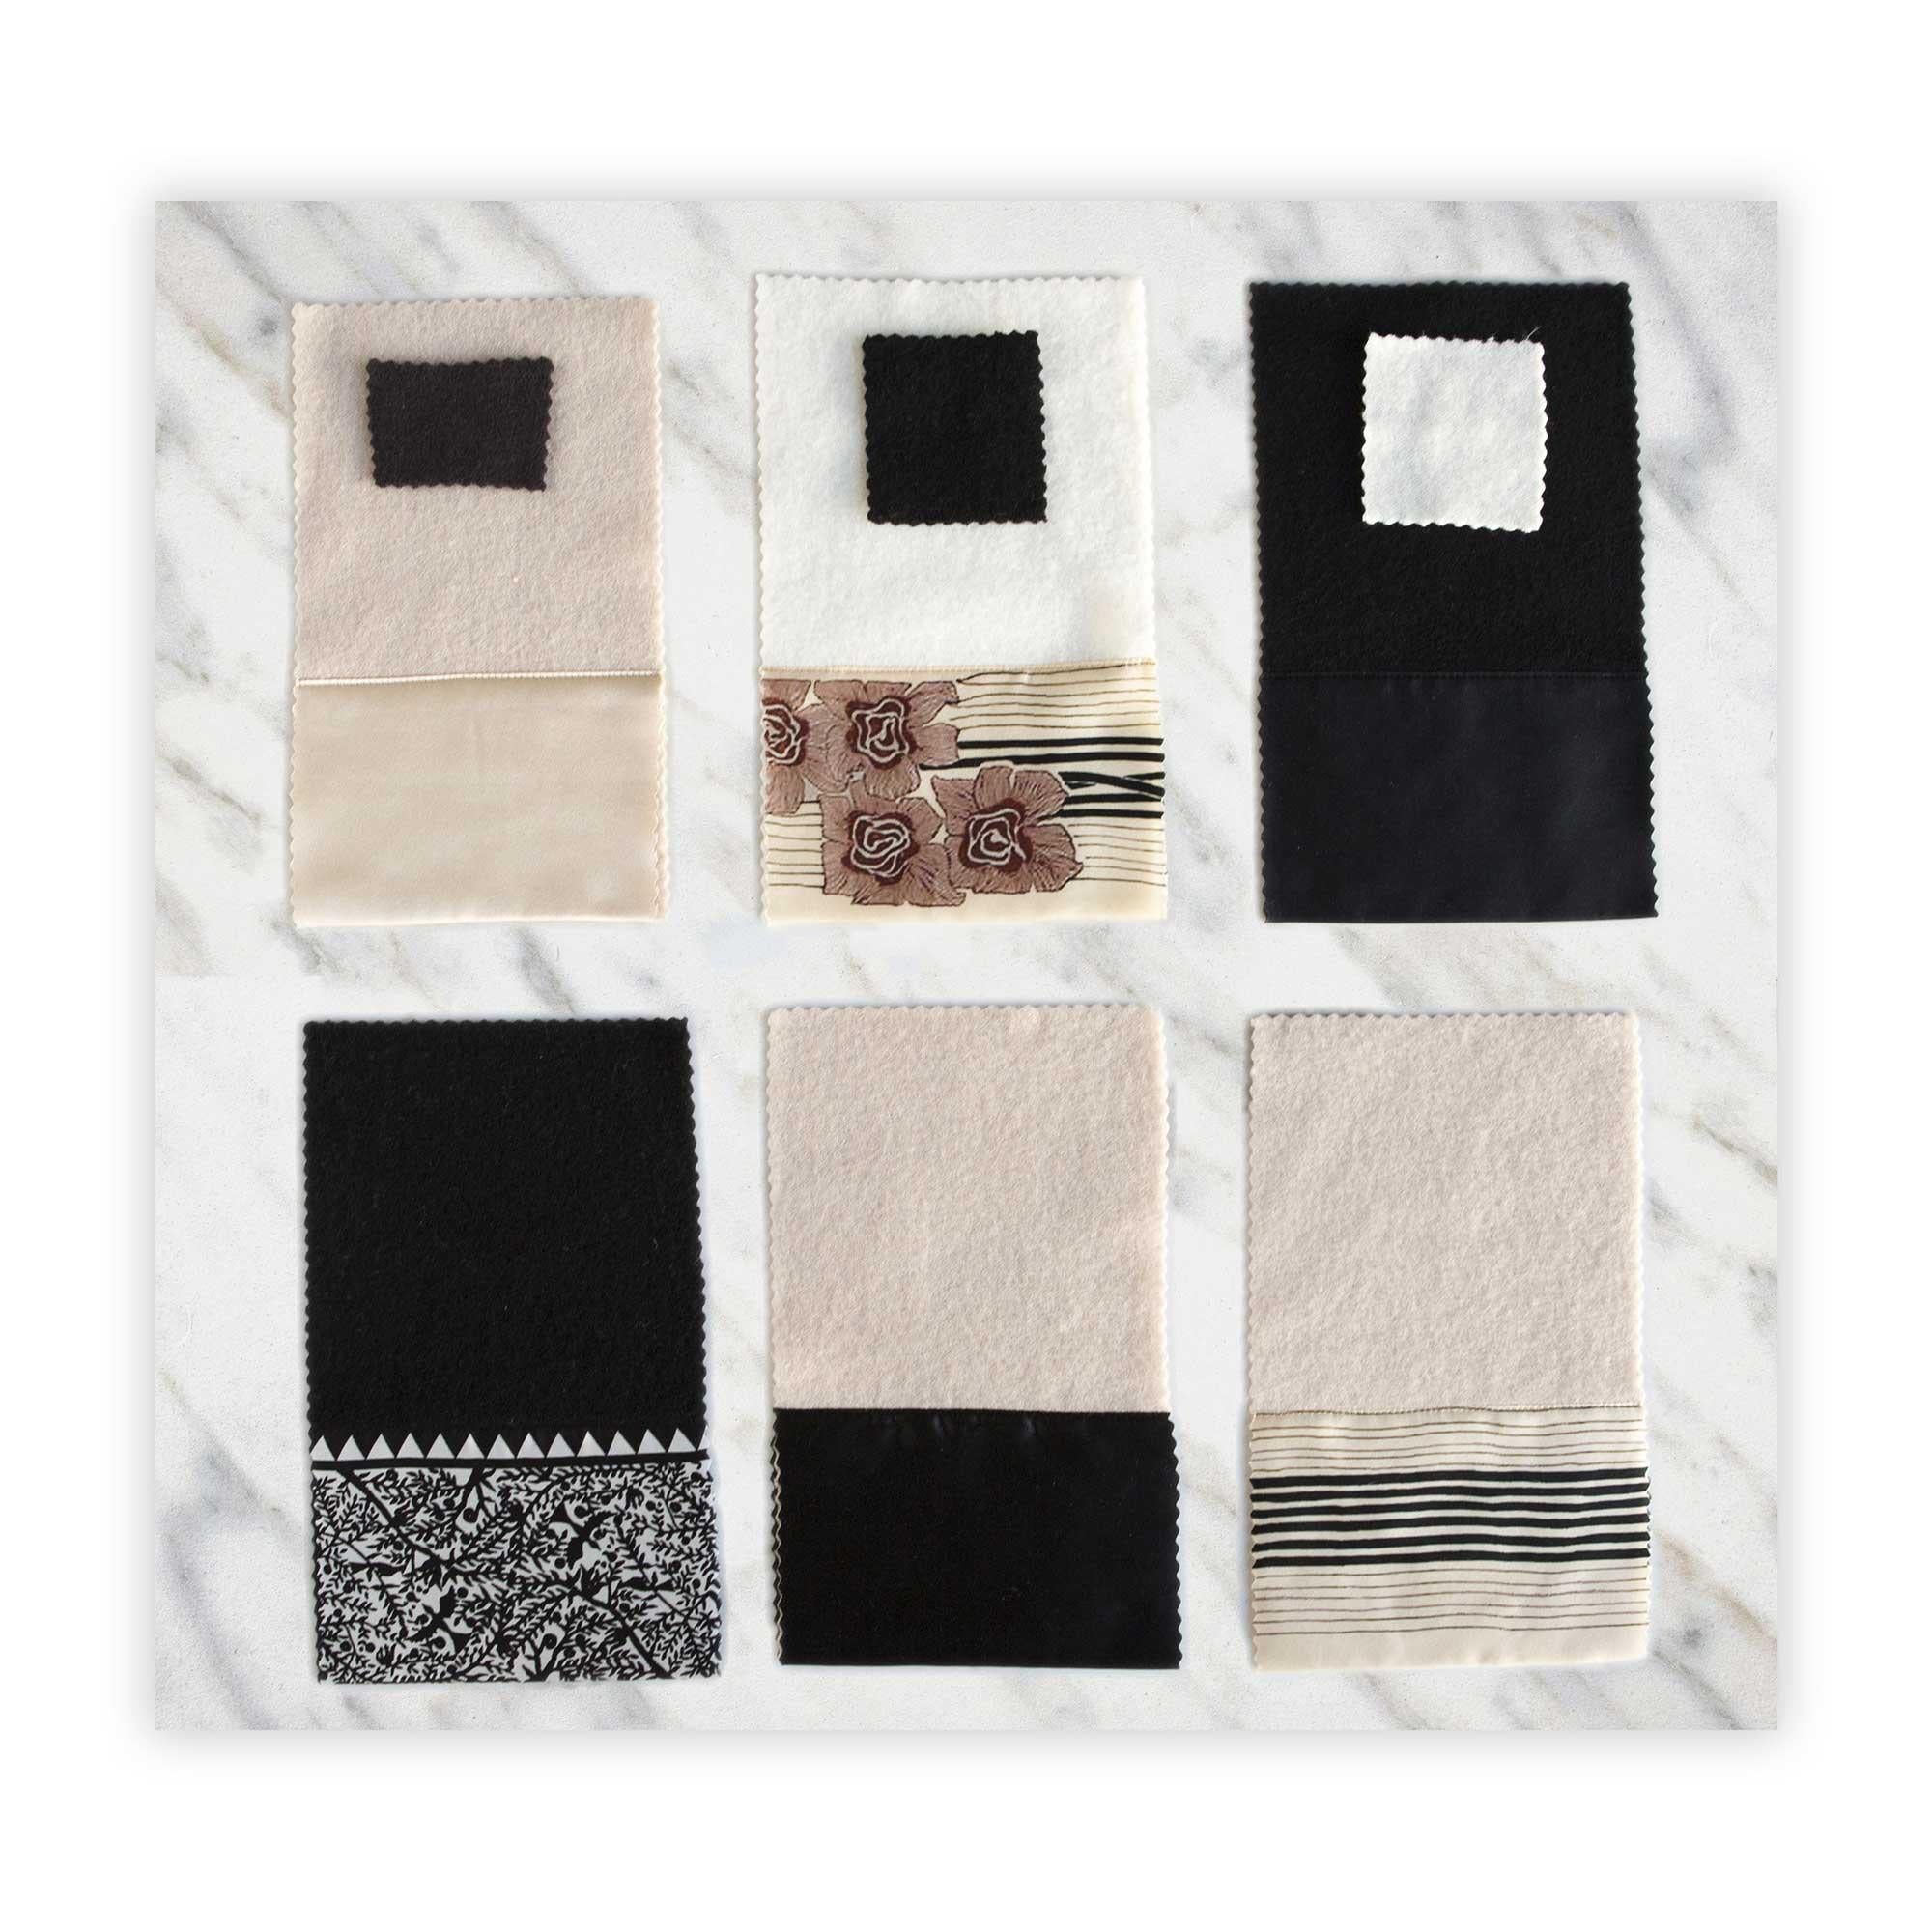 JG SWITZER's blankets are designed in-house and exist nowhere else in the world. This is a selection - you choose and please specify up to three swatches - with specific silk and/or blanket stitch finishing. We offer 1) CASHMERE/WOOL BLEND. Cashmere